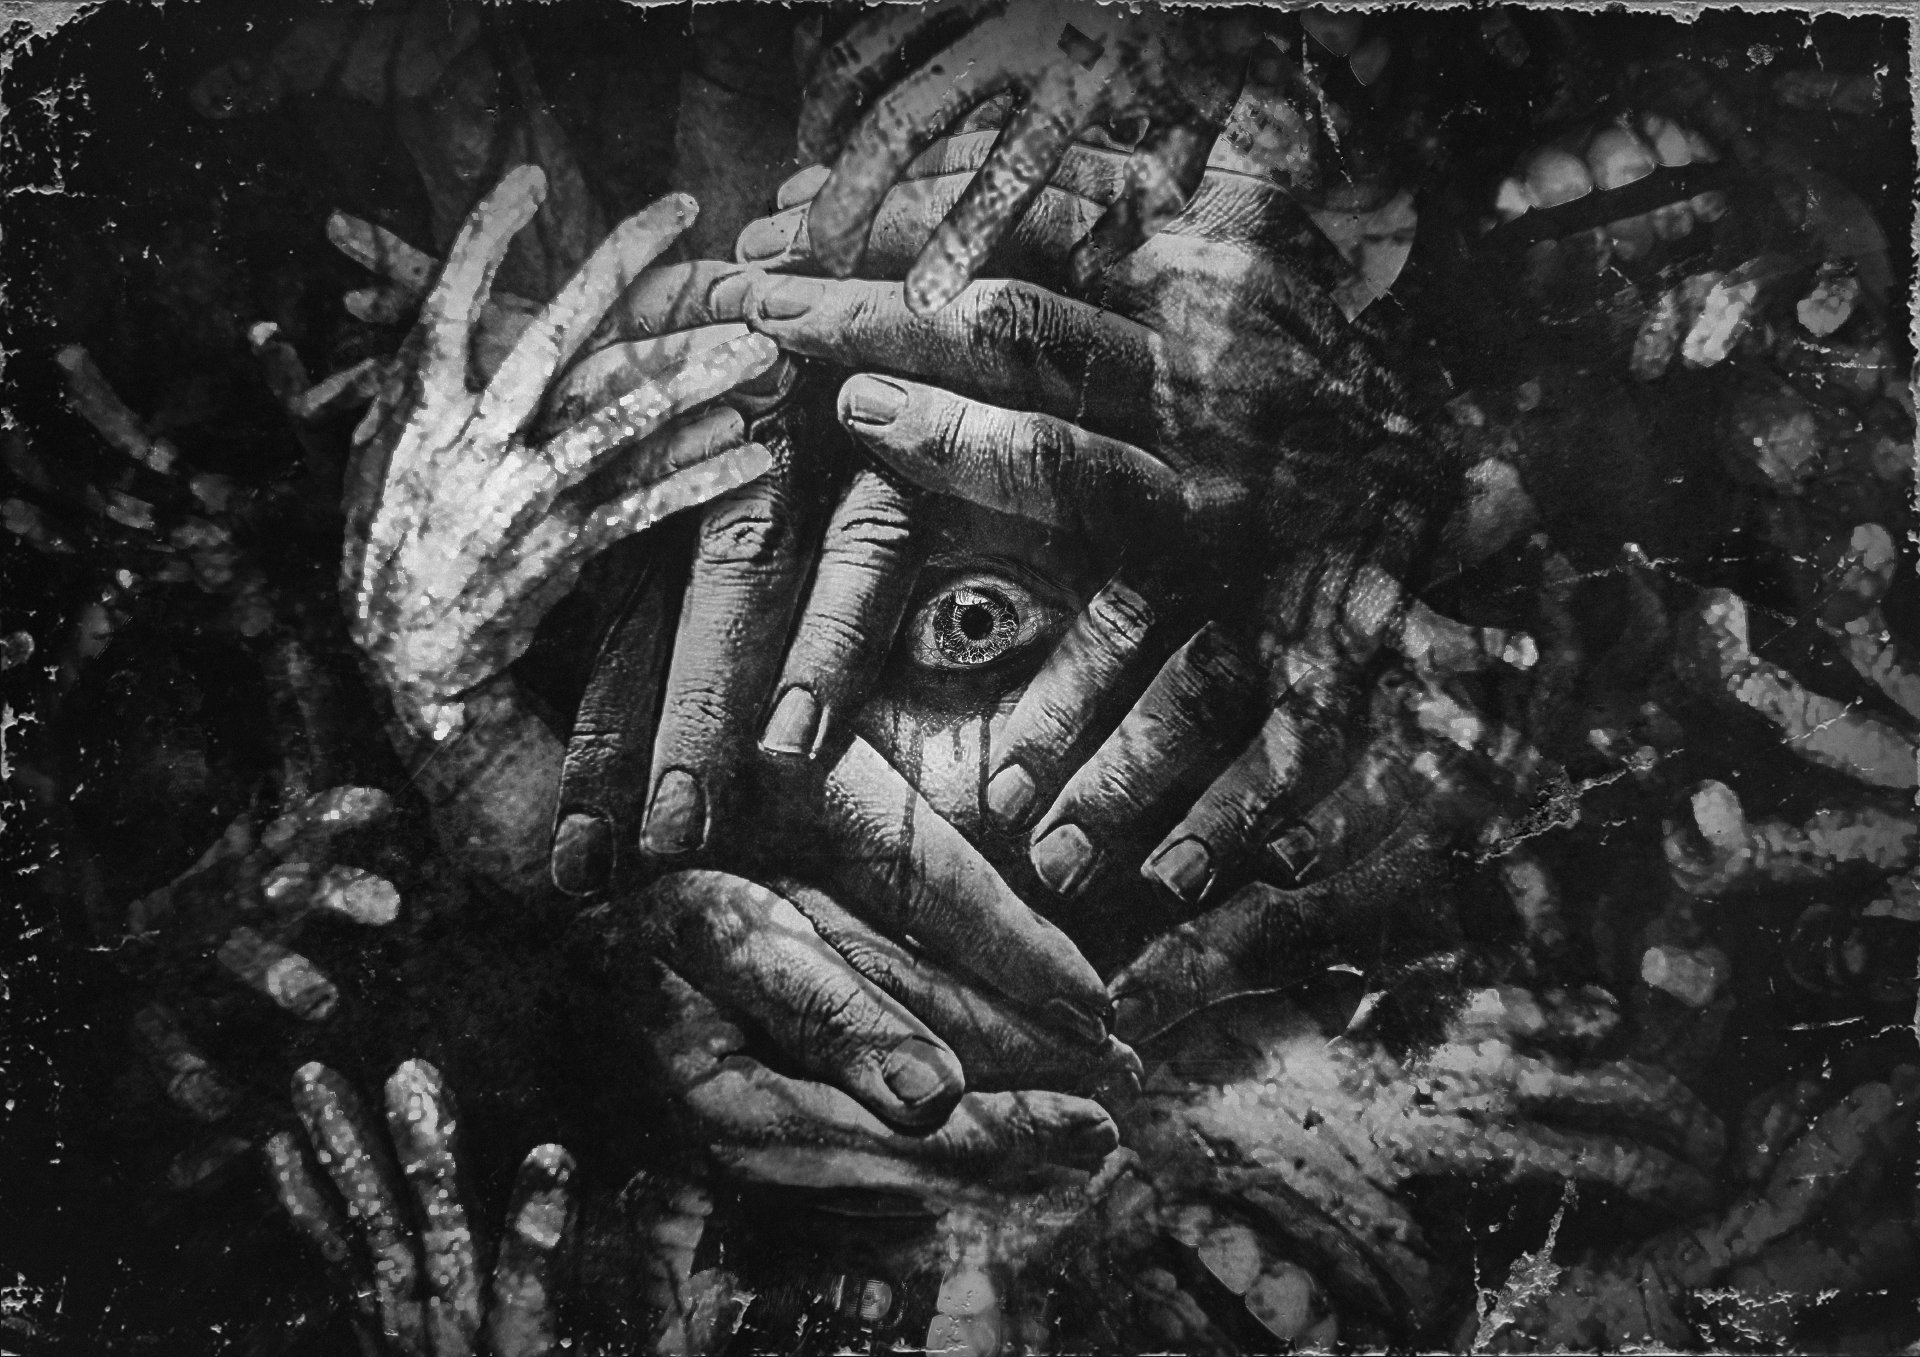 eyes, Hands, The Evil Within 2, Horror, Video games, Monochrome Wallpaper